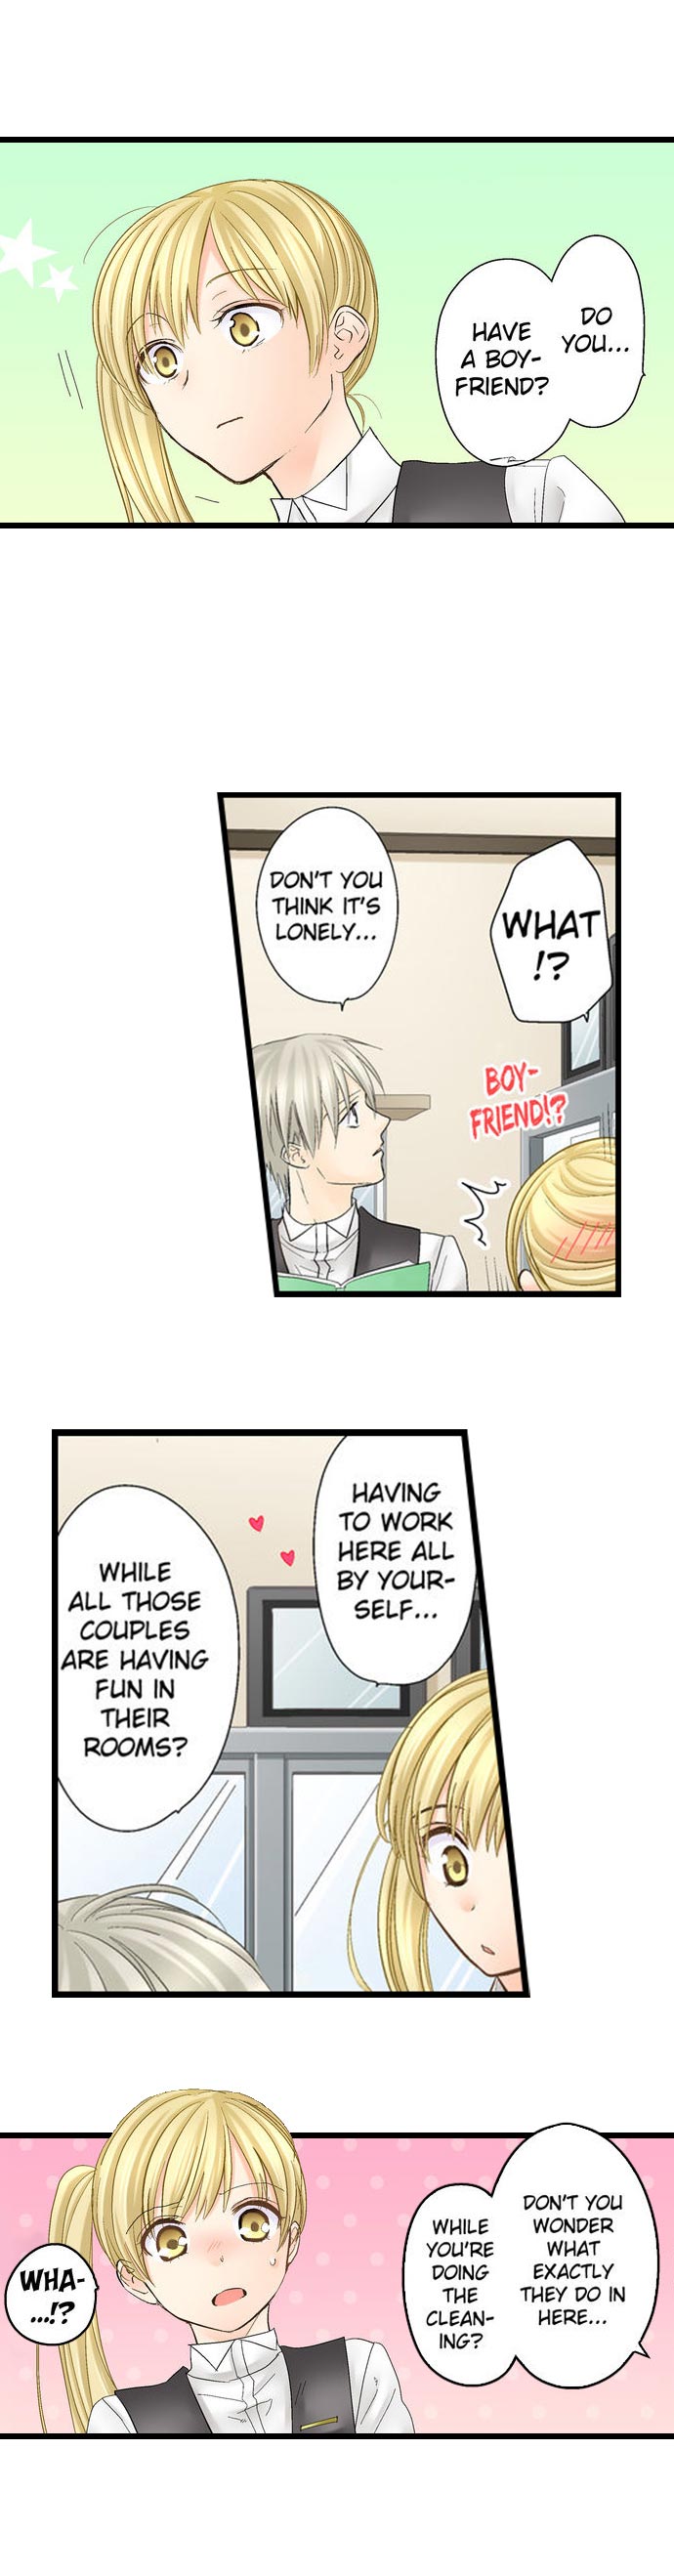 Running a Love Hotel with My Math Teacher - Chapter 22 Page 6